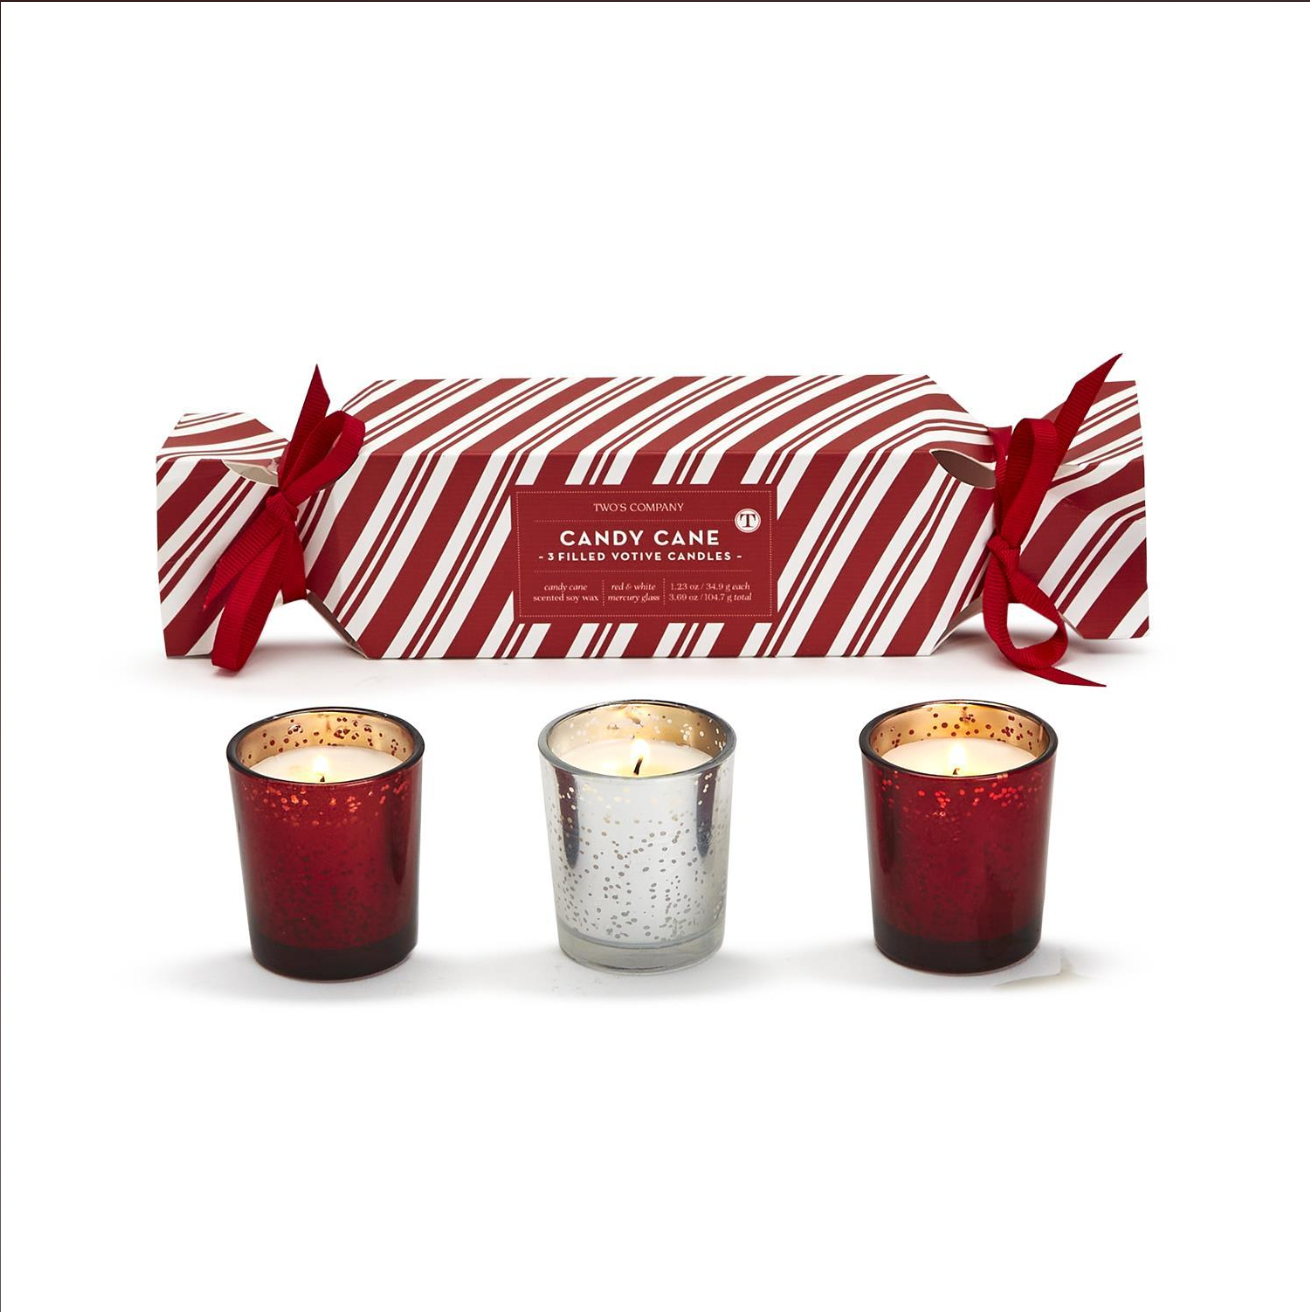 Candle Cracker Candy Cane Scented Candles